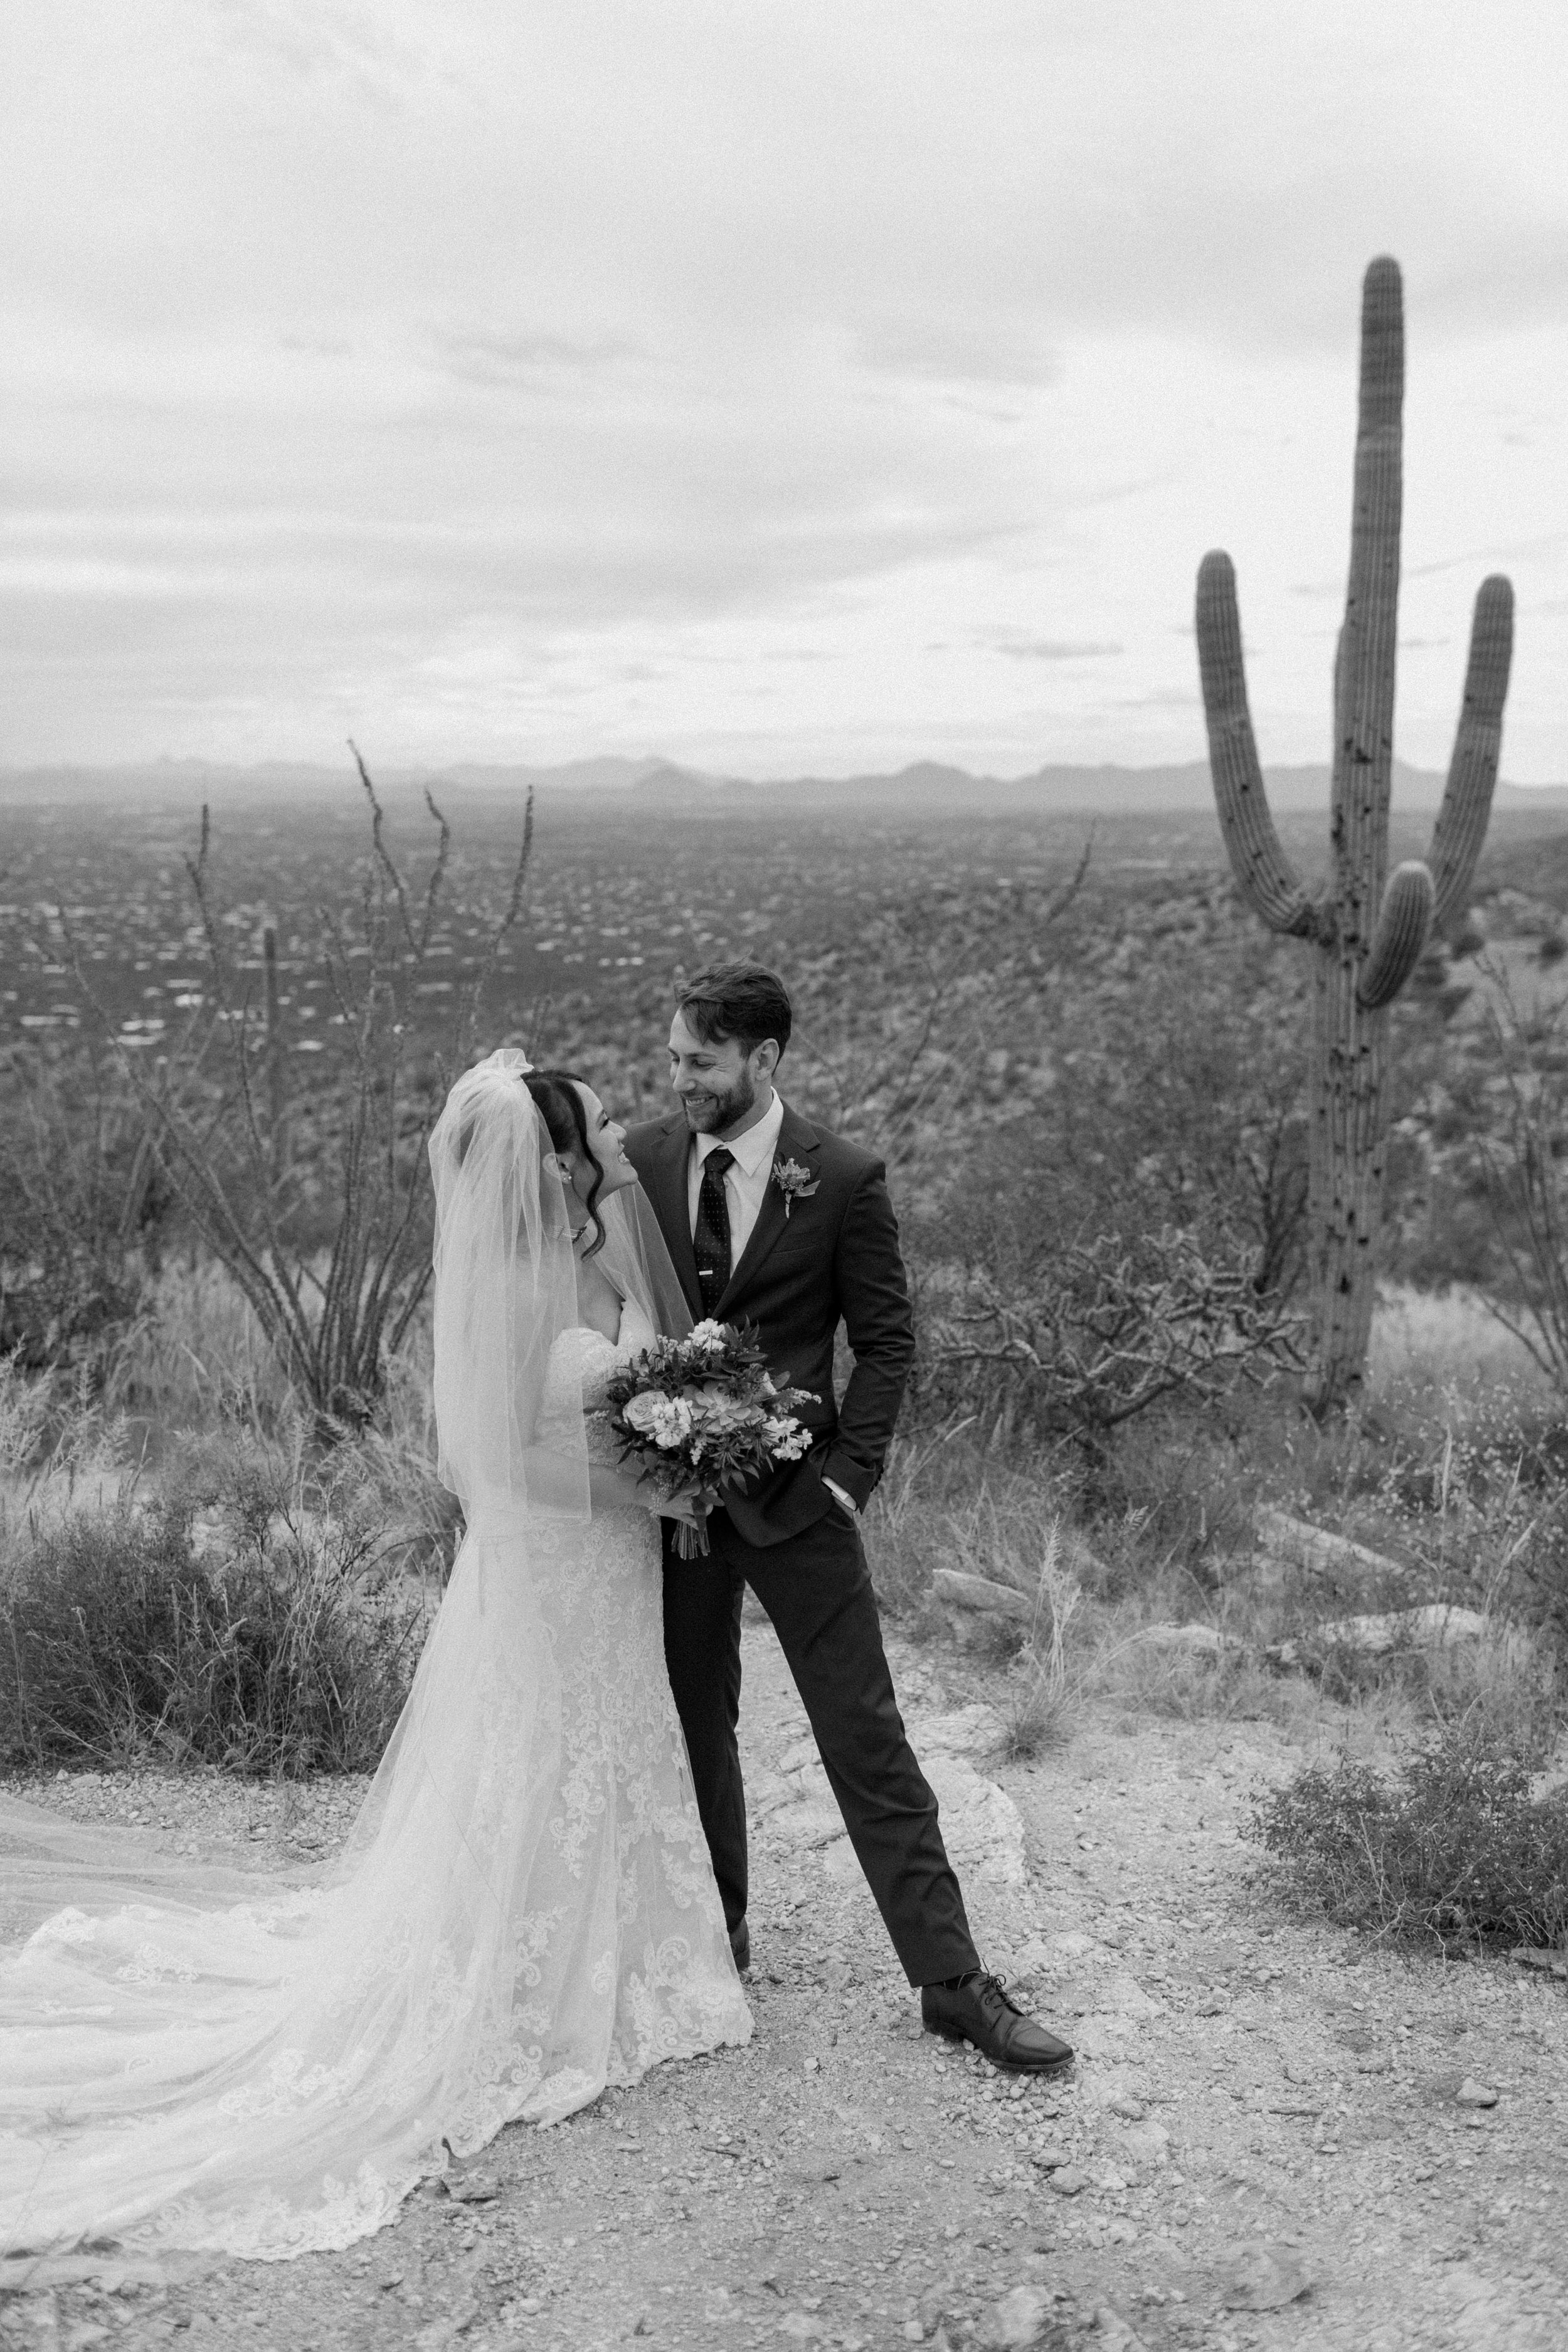  married couple in desert by Lucy bouman photo 